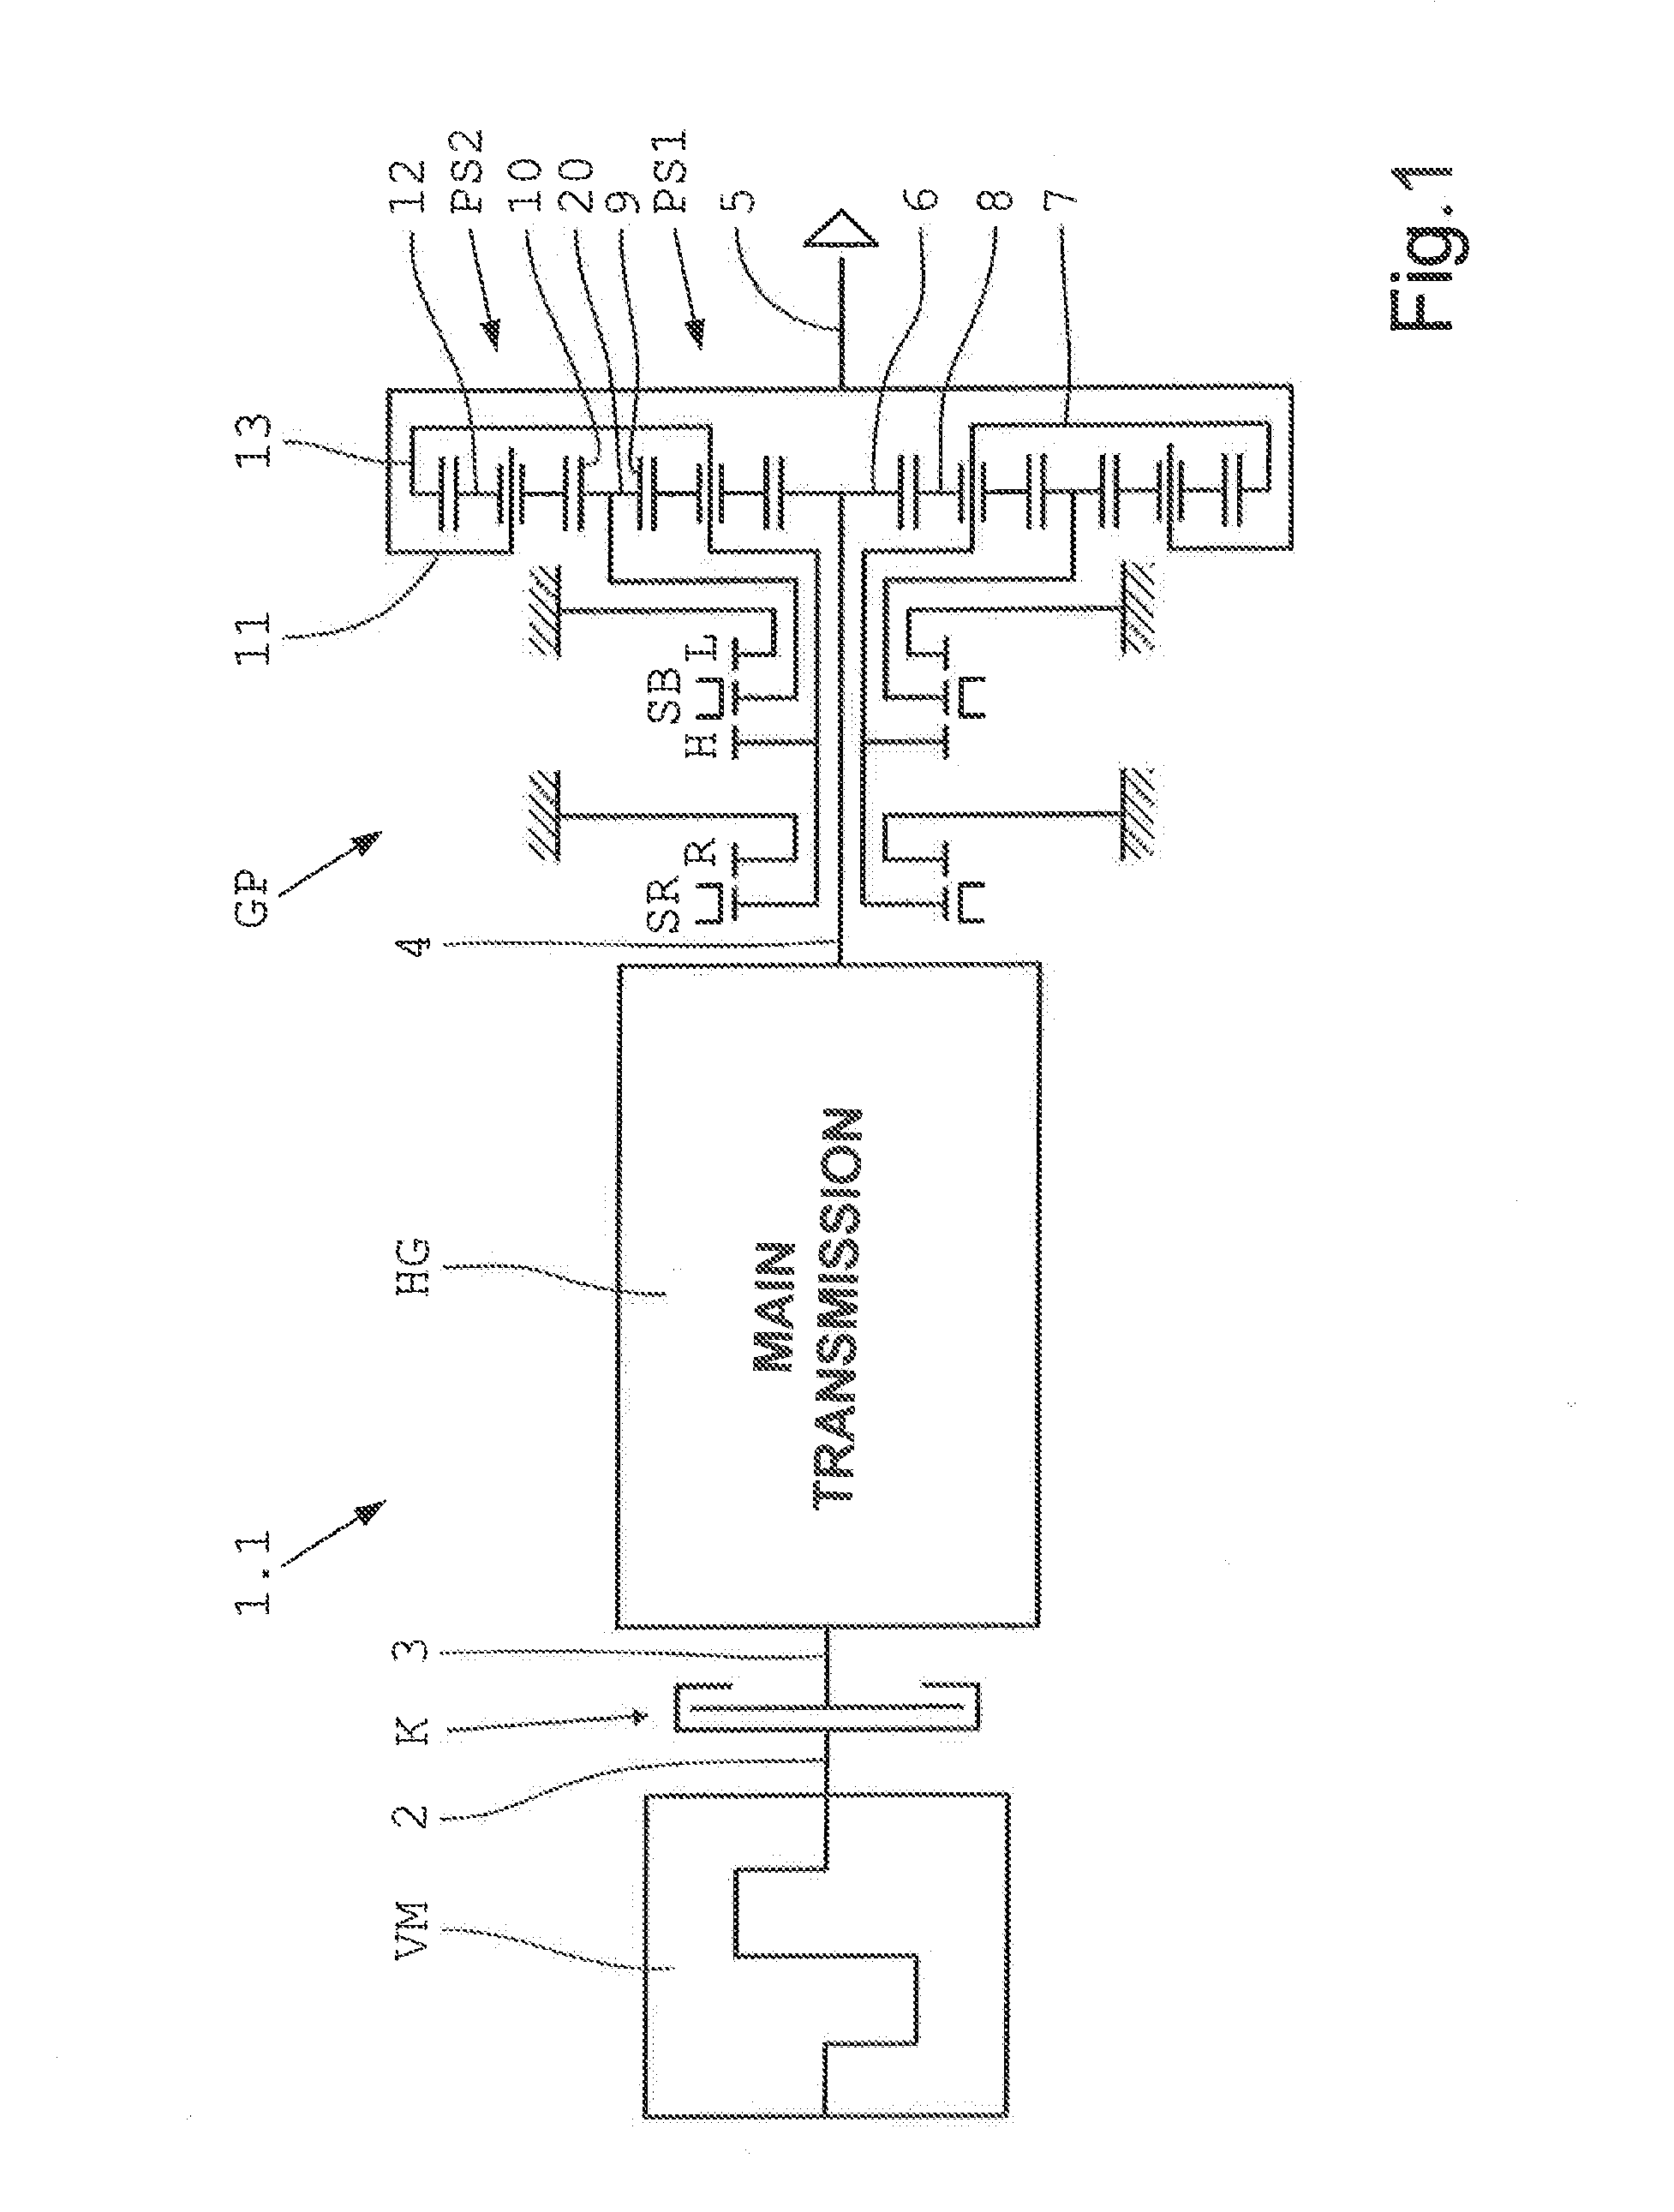 Planetary gear and group transmission with planetary gear